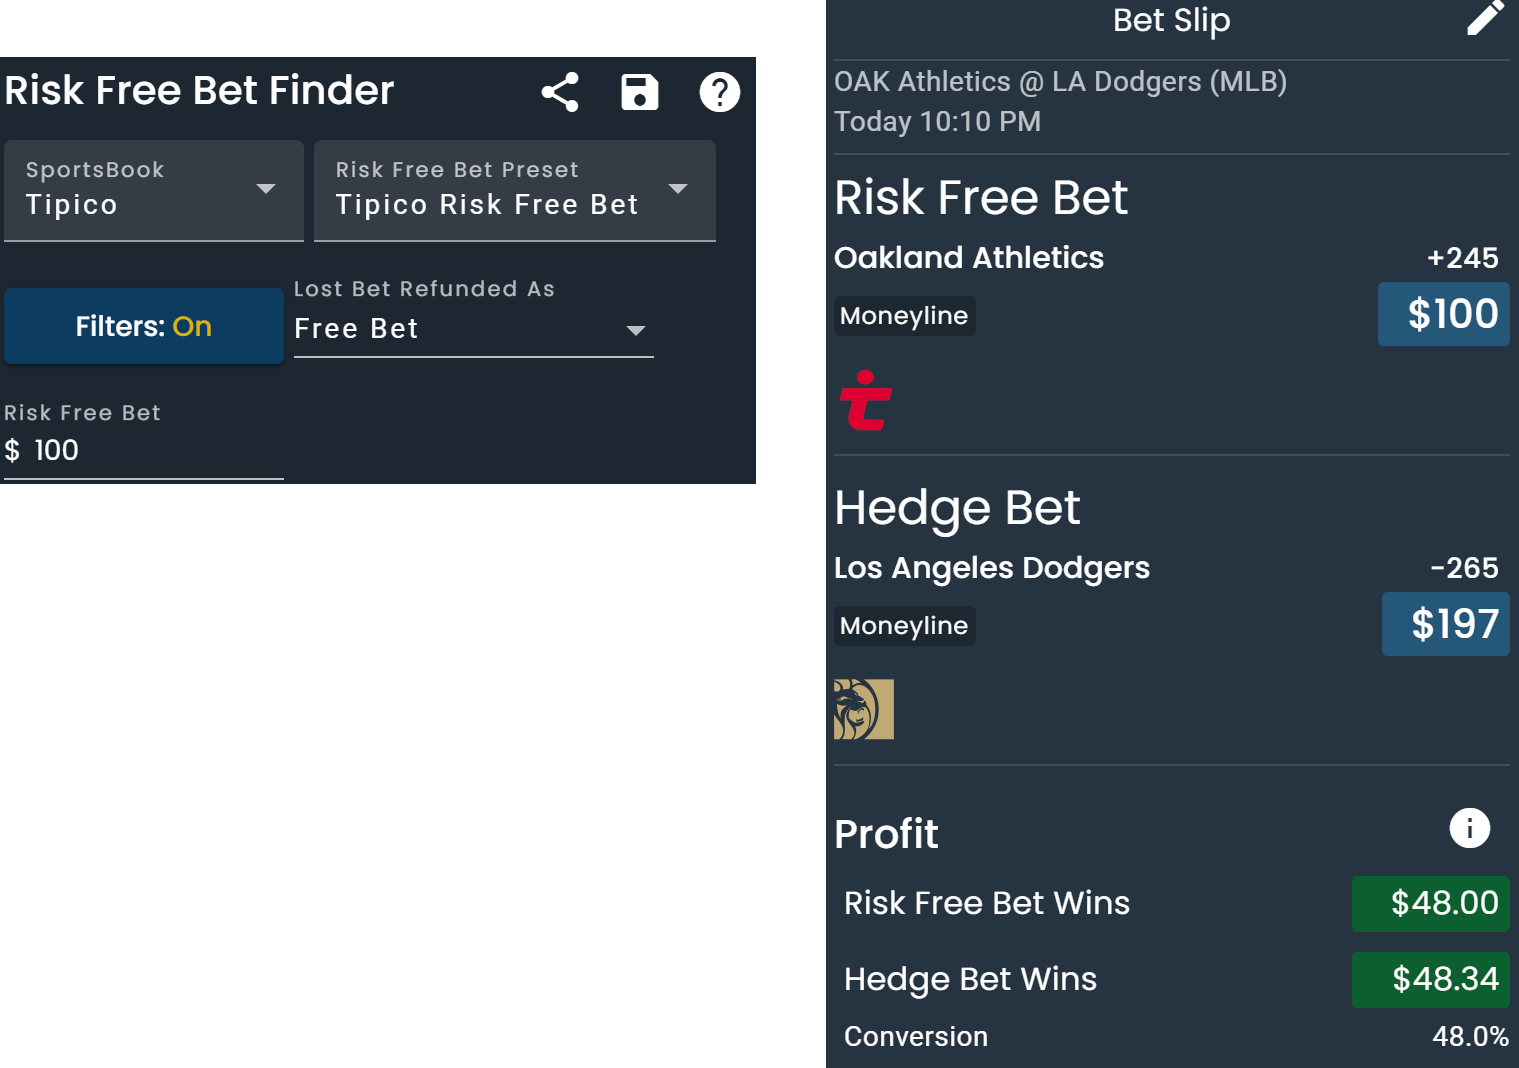 Screenshot of the Risk Free Bet Finder on DarkHorse Odds for a Tipico Risk Free Bet.